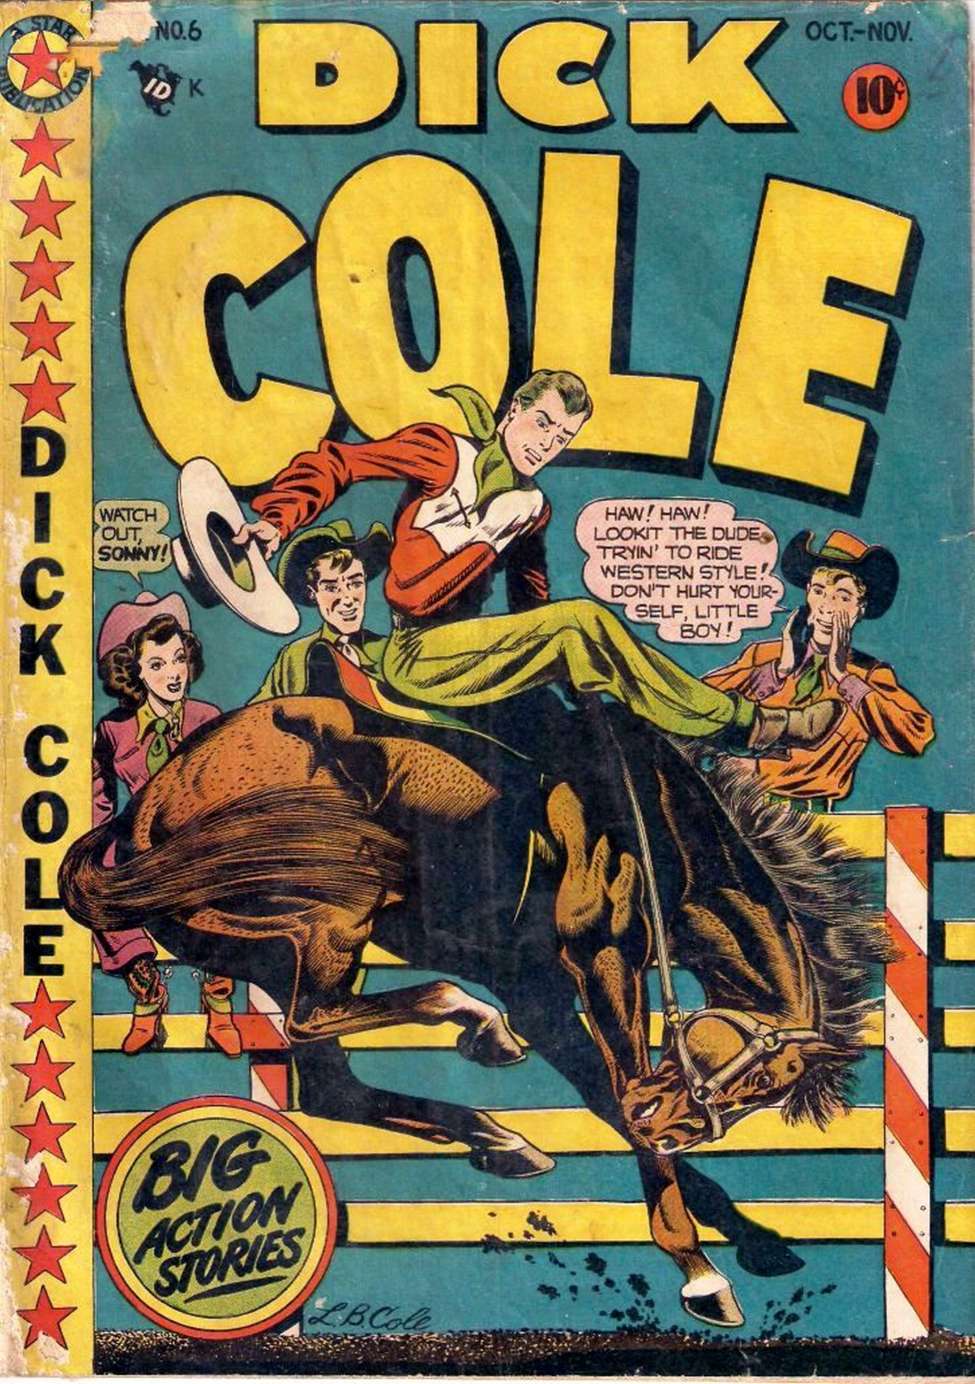 Book Cover For Dick Cole 6 - Version 1